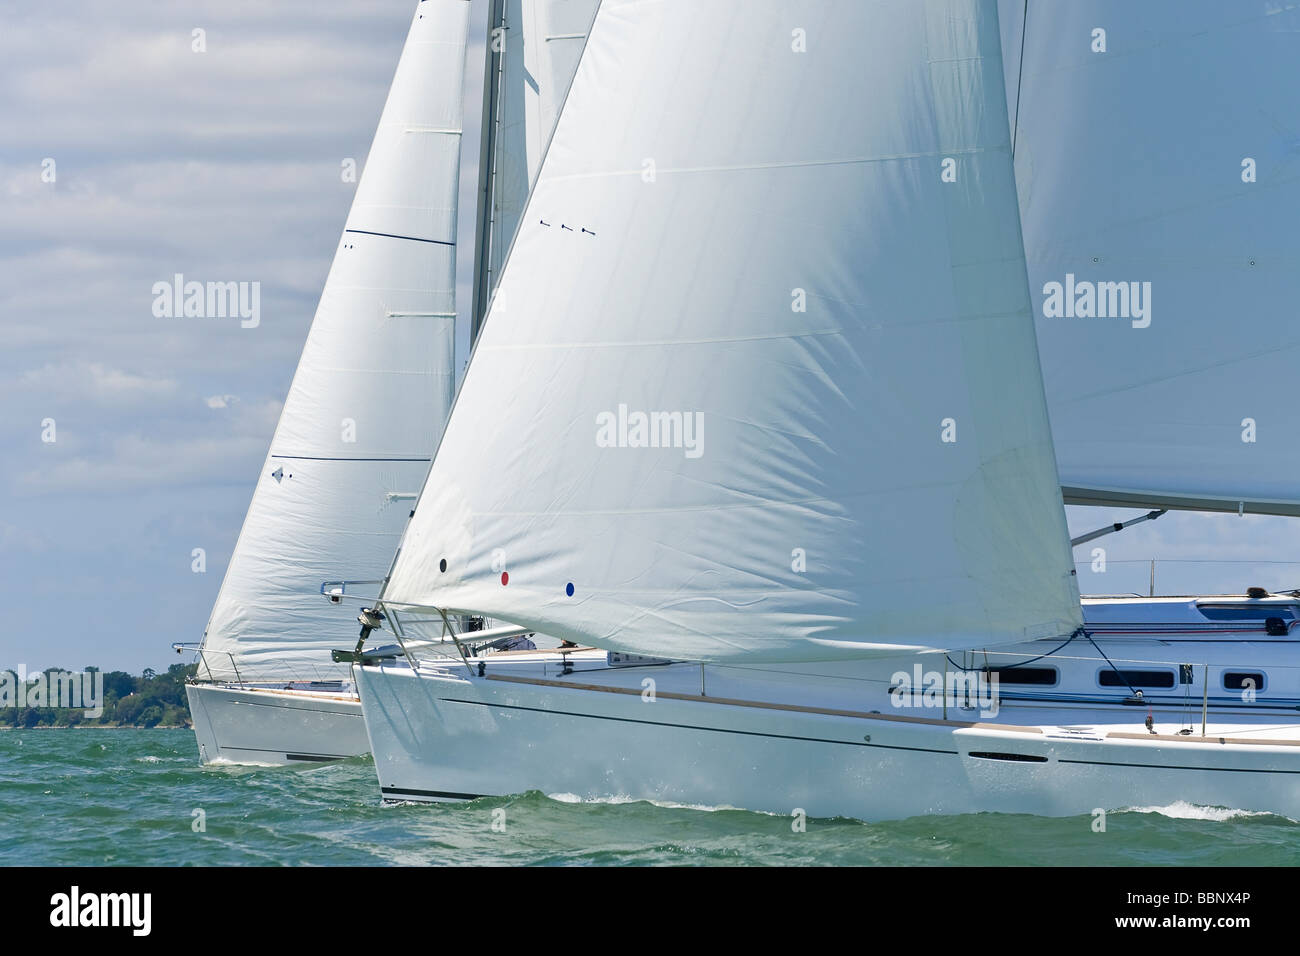 Two beautiful white yachts sailing close to each other on a bright sunny day Stock Photo